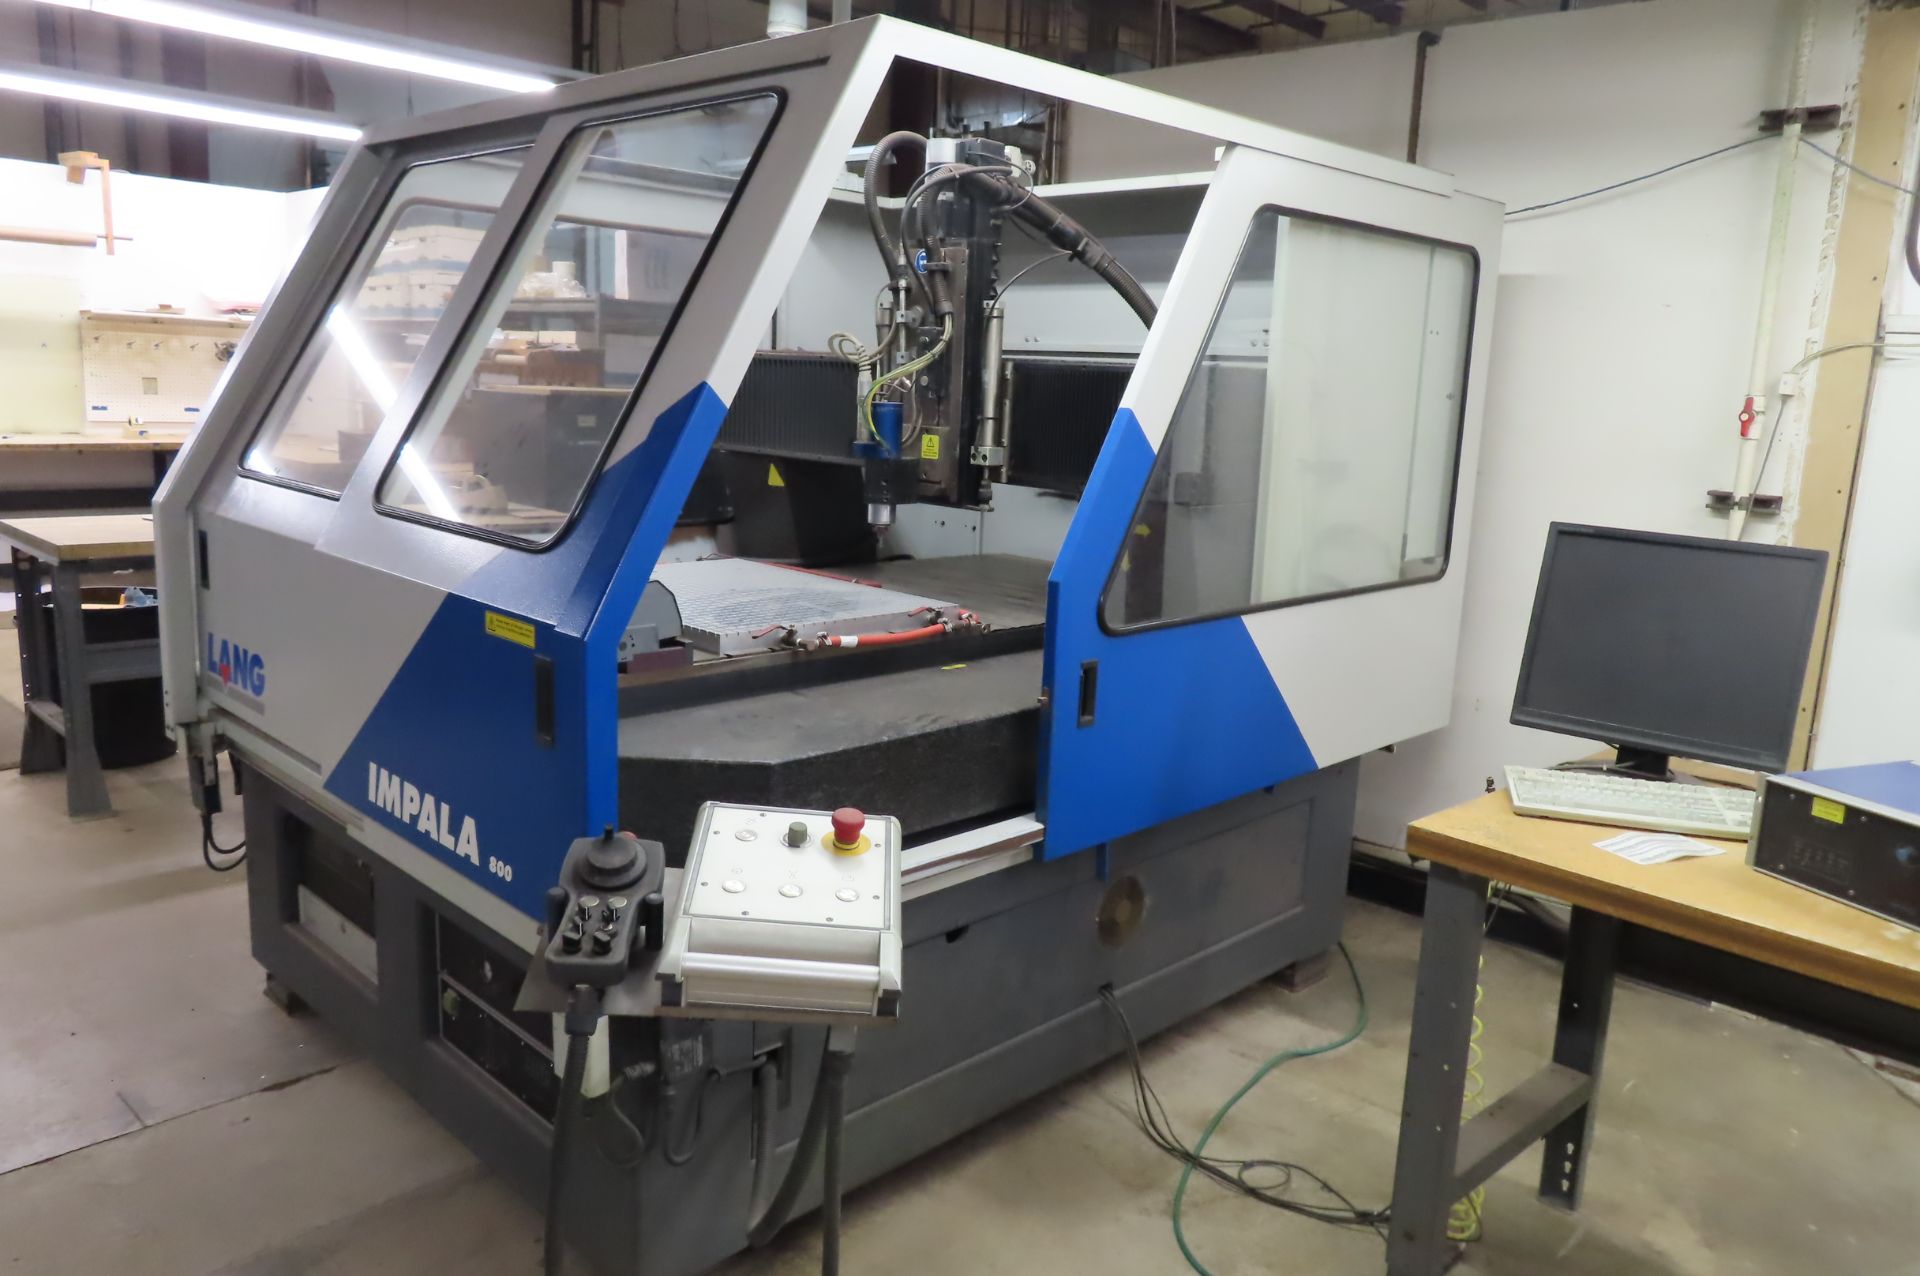 2007 LANG IMPALA 800 CNC ENGRAVING AND MILLING MACHINE, S/N 0709-H530-58, 3 AXIS, X-31 IN... - Image 10 of 16